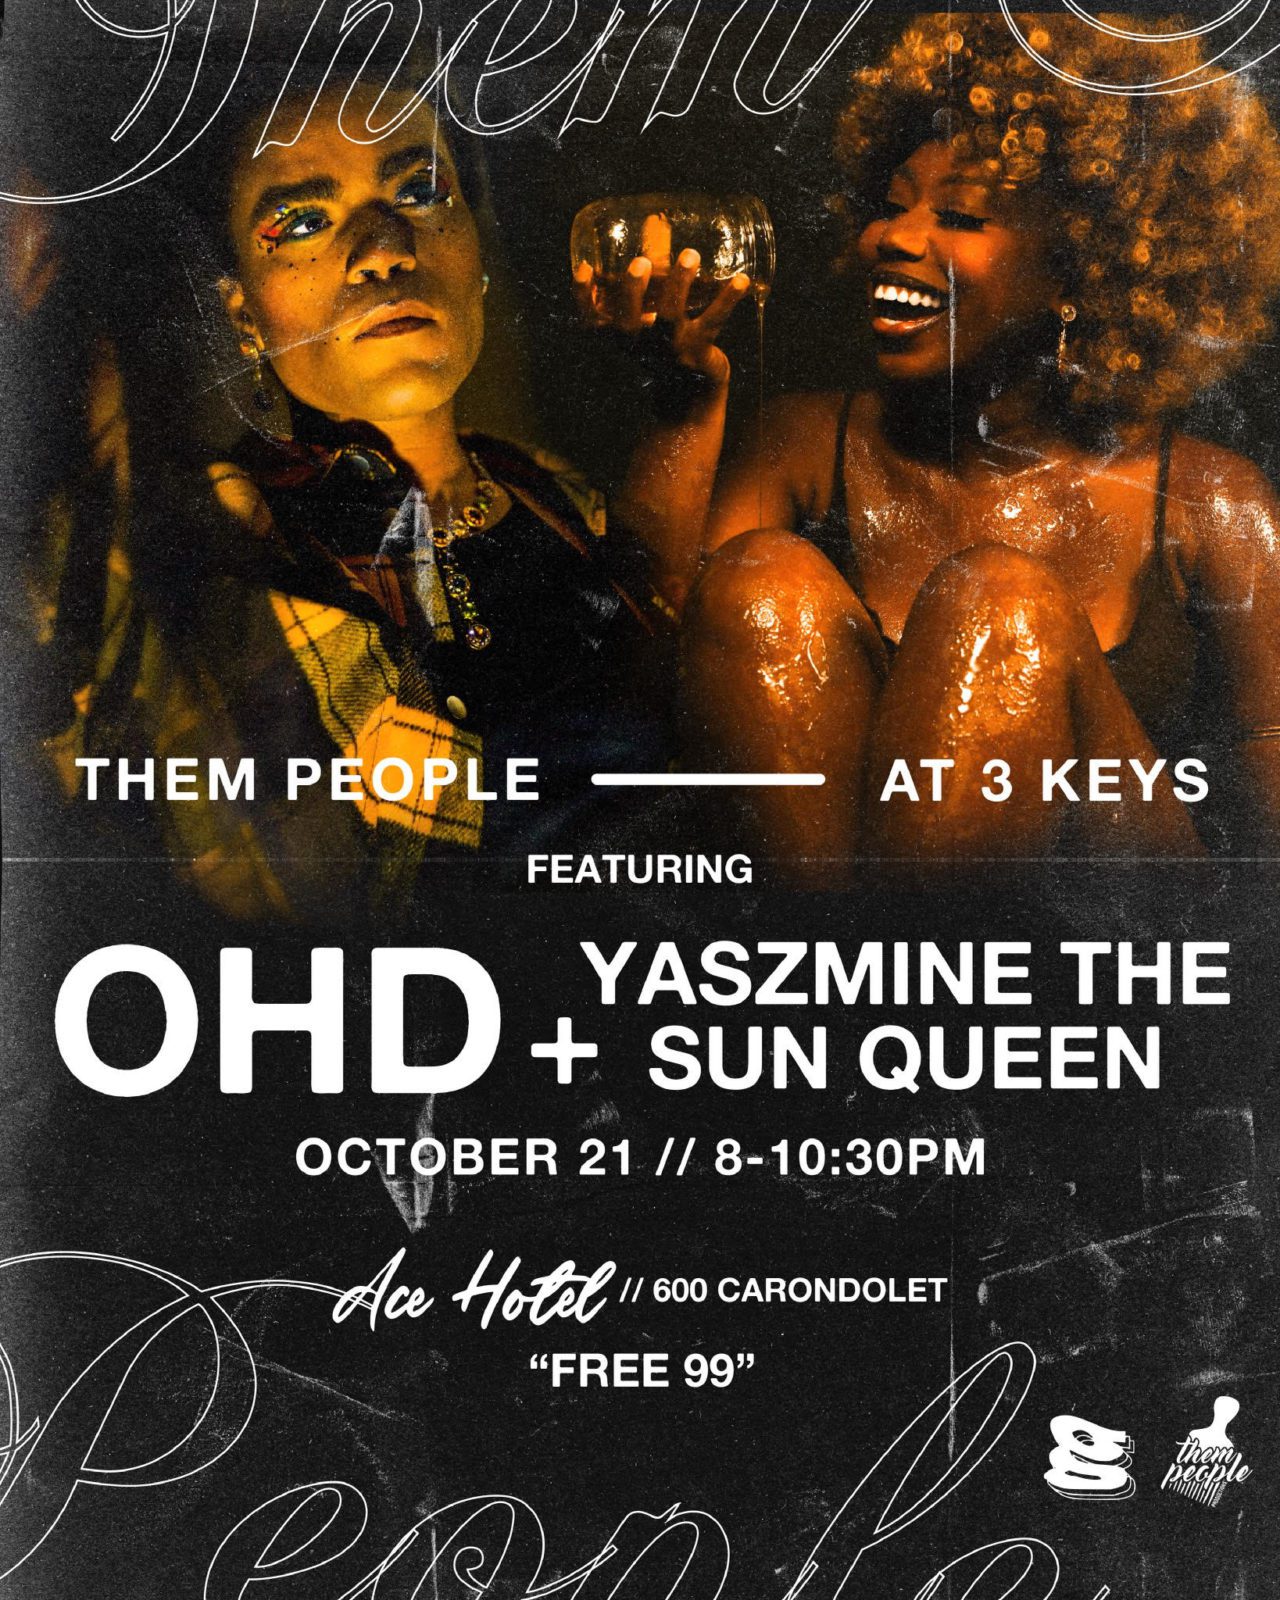 OHD and Yaszmine the sun queen poster